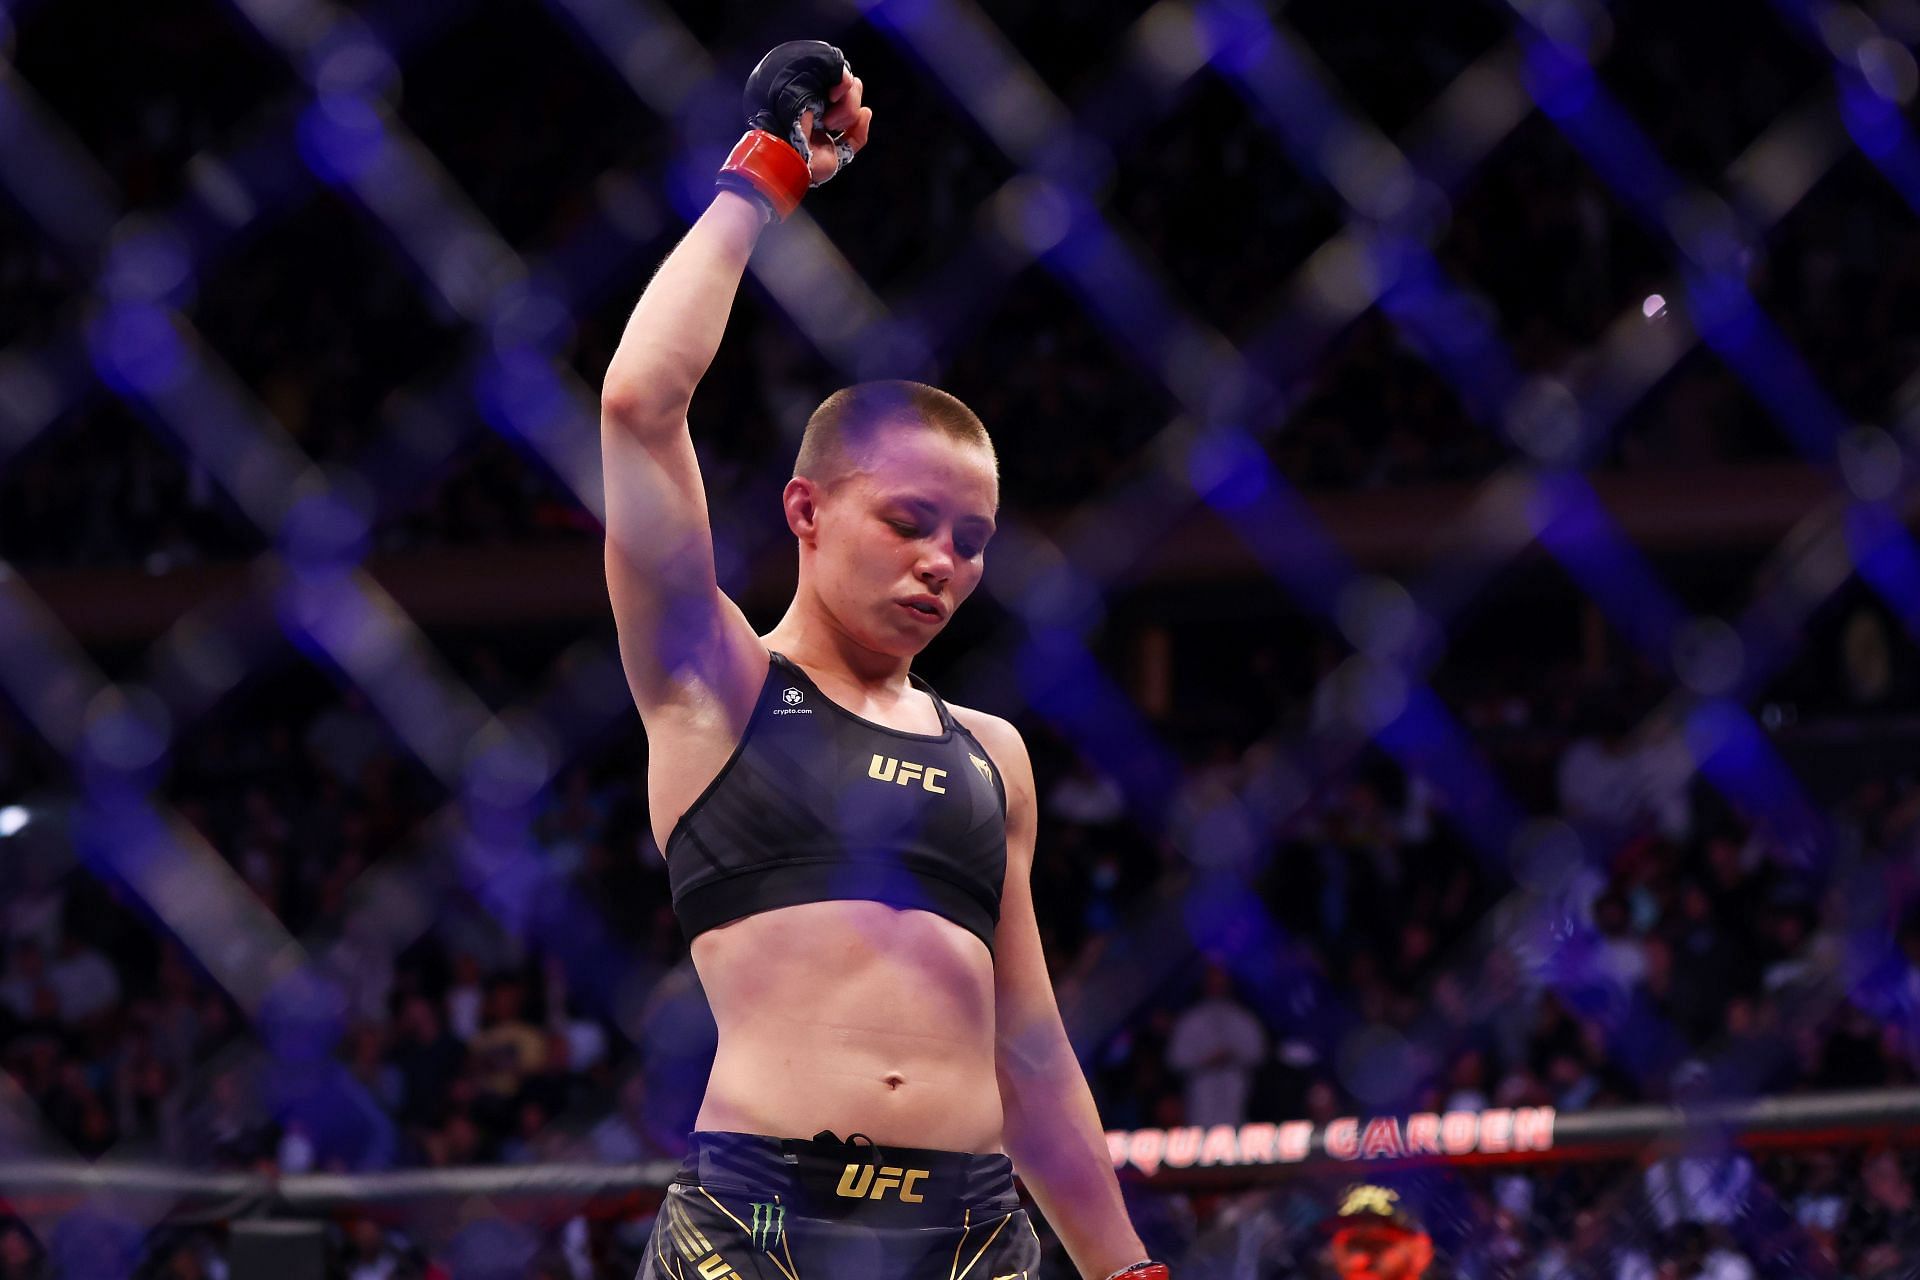 Rose Namajunas will be hopeful of avenging her 2014 loss to Carla Esparza this weekend